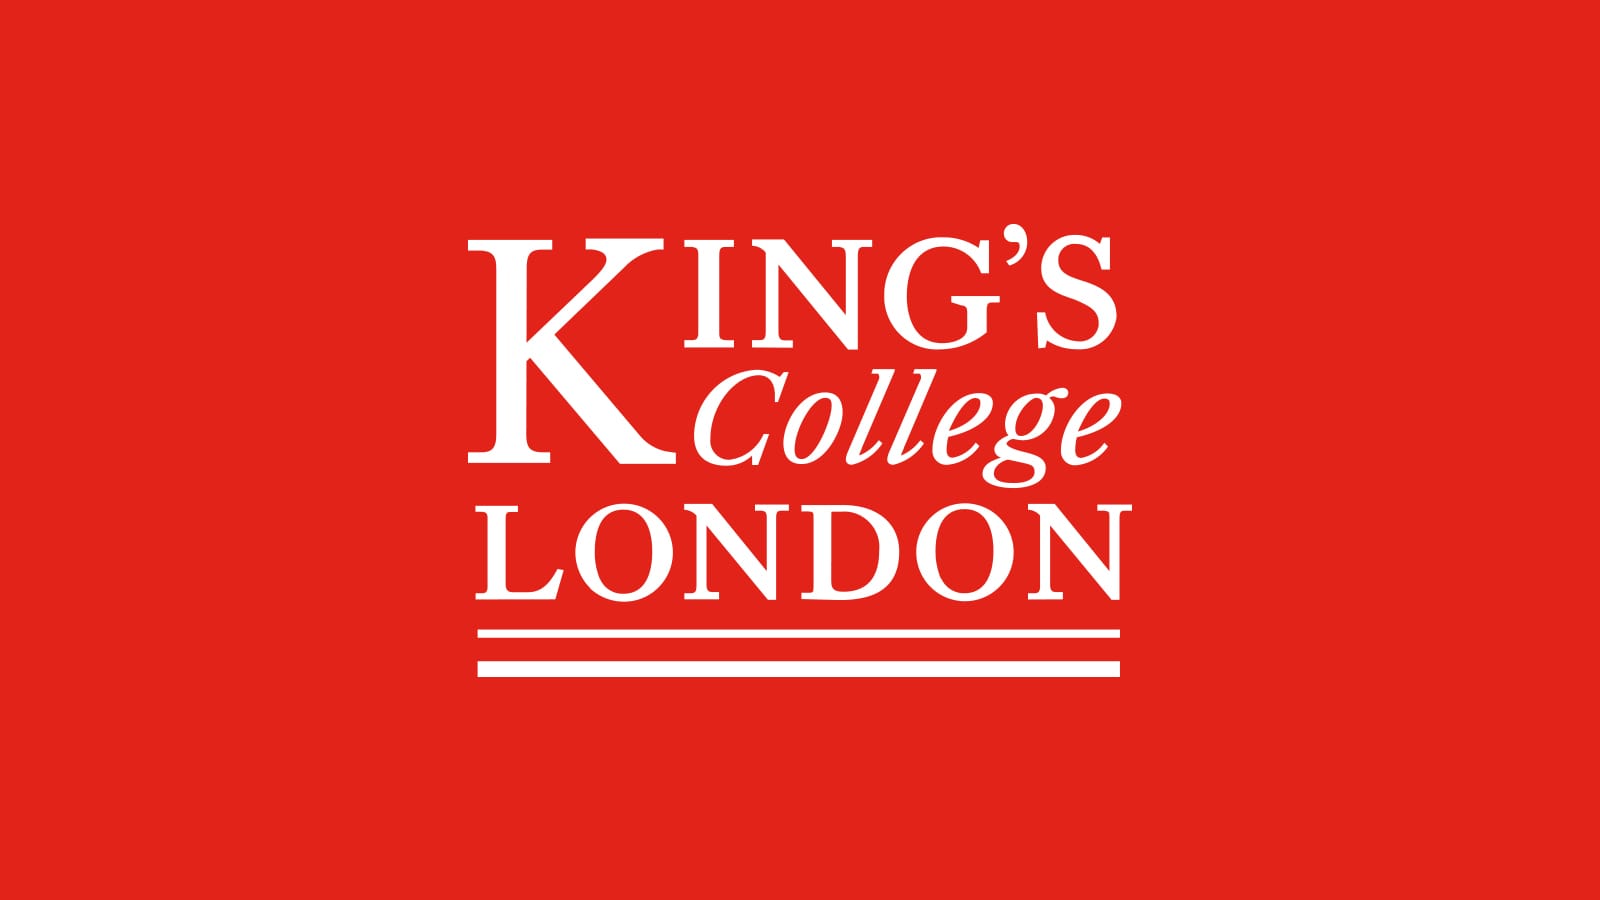 King's commitment to fair and responsible assessment